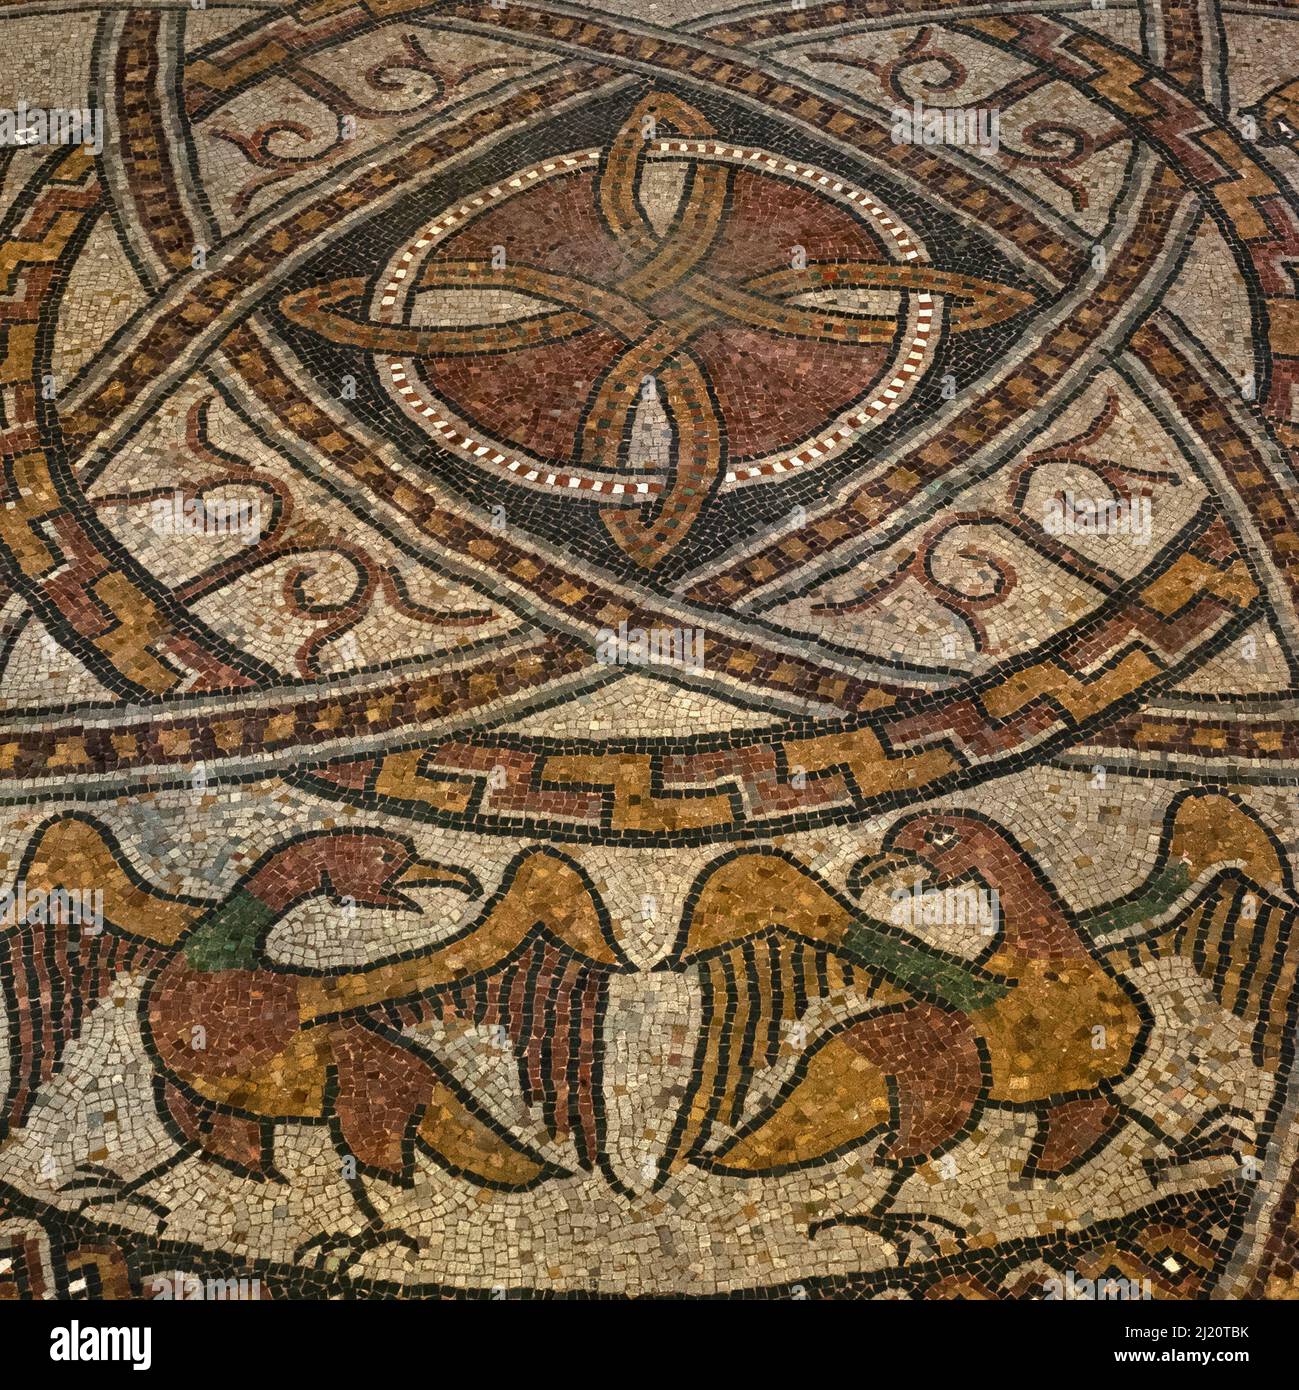 Eagles with outstretched wings and open beaks turn to face each other.  Medieval mosaic in restored late-1000s or early 1100s pavement in former Benedictine abbey church at Sorde l'Abbaye, Landes, Nouvelle-Aquitaine, France. Stock Photo